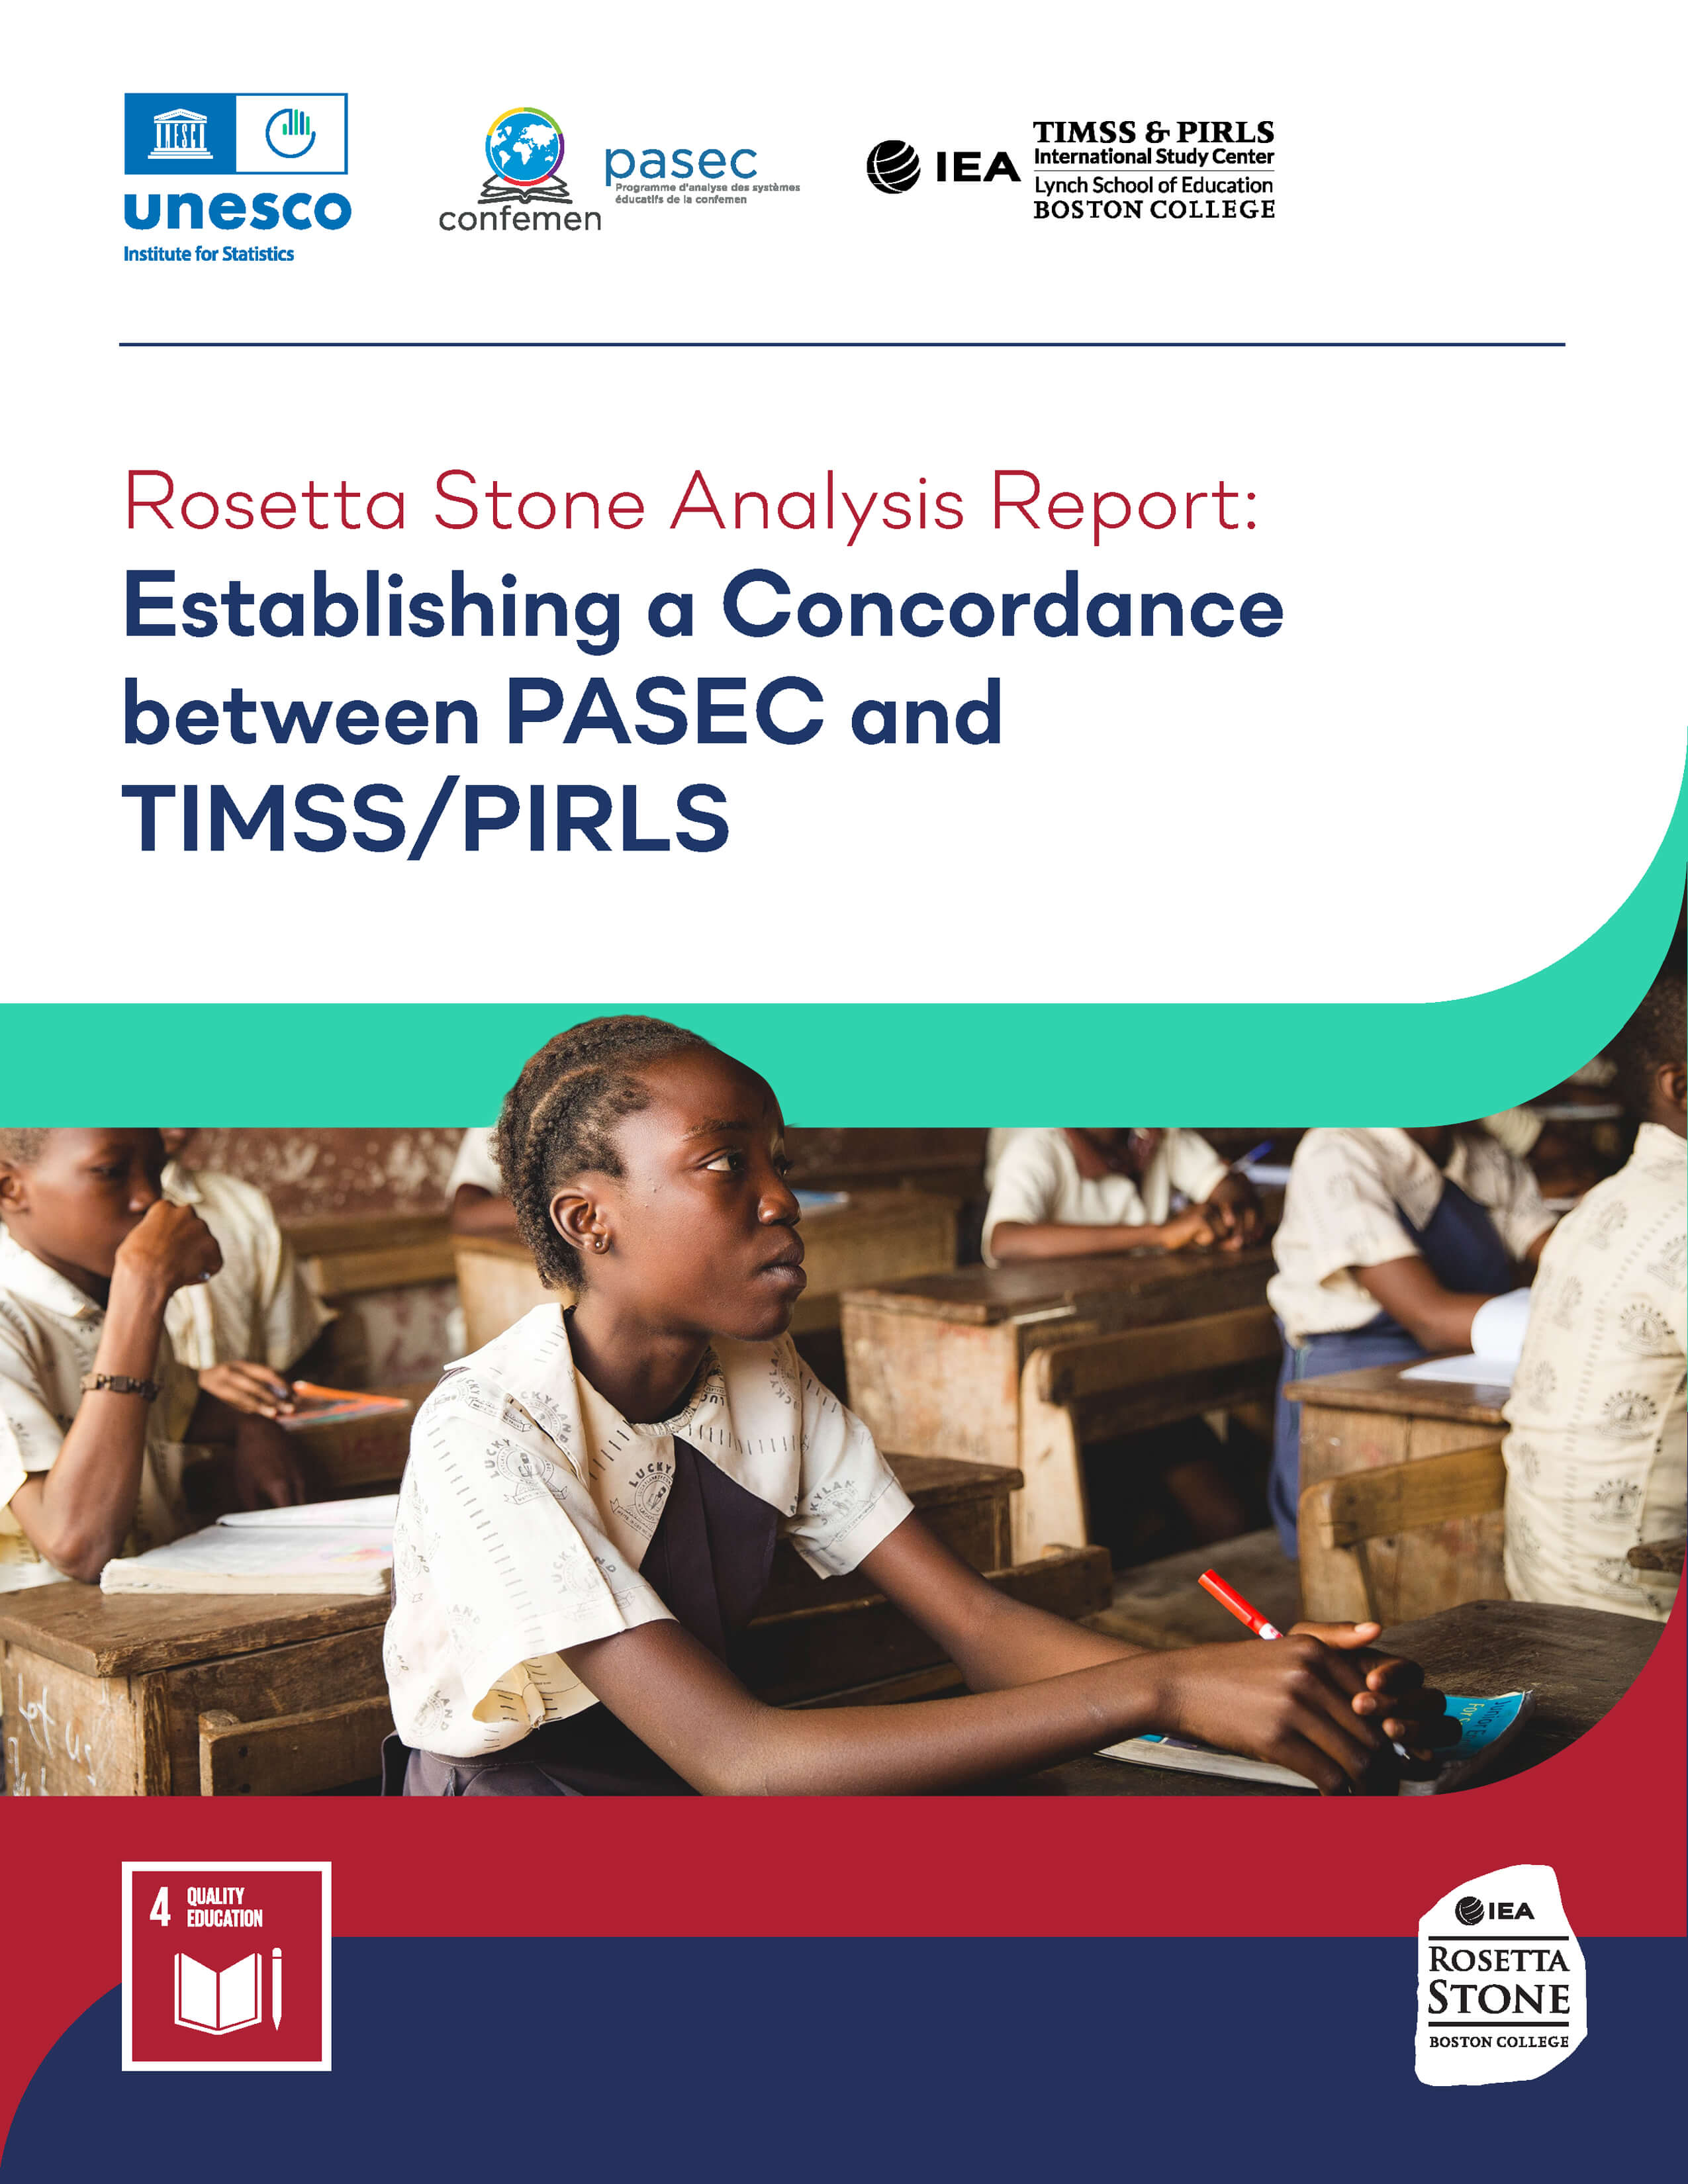 Cover art for the Rosetta Stone PASEC Analysis Report: Establishing a Concordance between PASEC and TIMSS/PIRLS; featuring logotypes of IEA, Boston College Lynch School of Education, UNESCO, CONFEMEN, and PASEC.